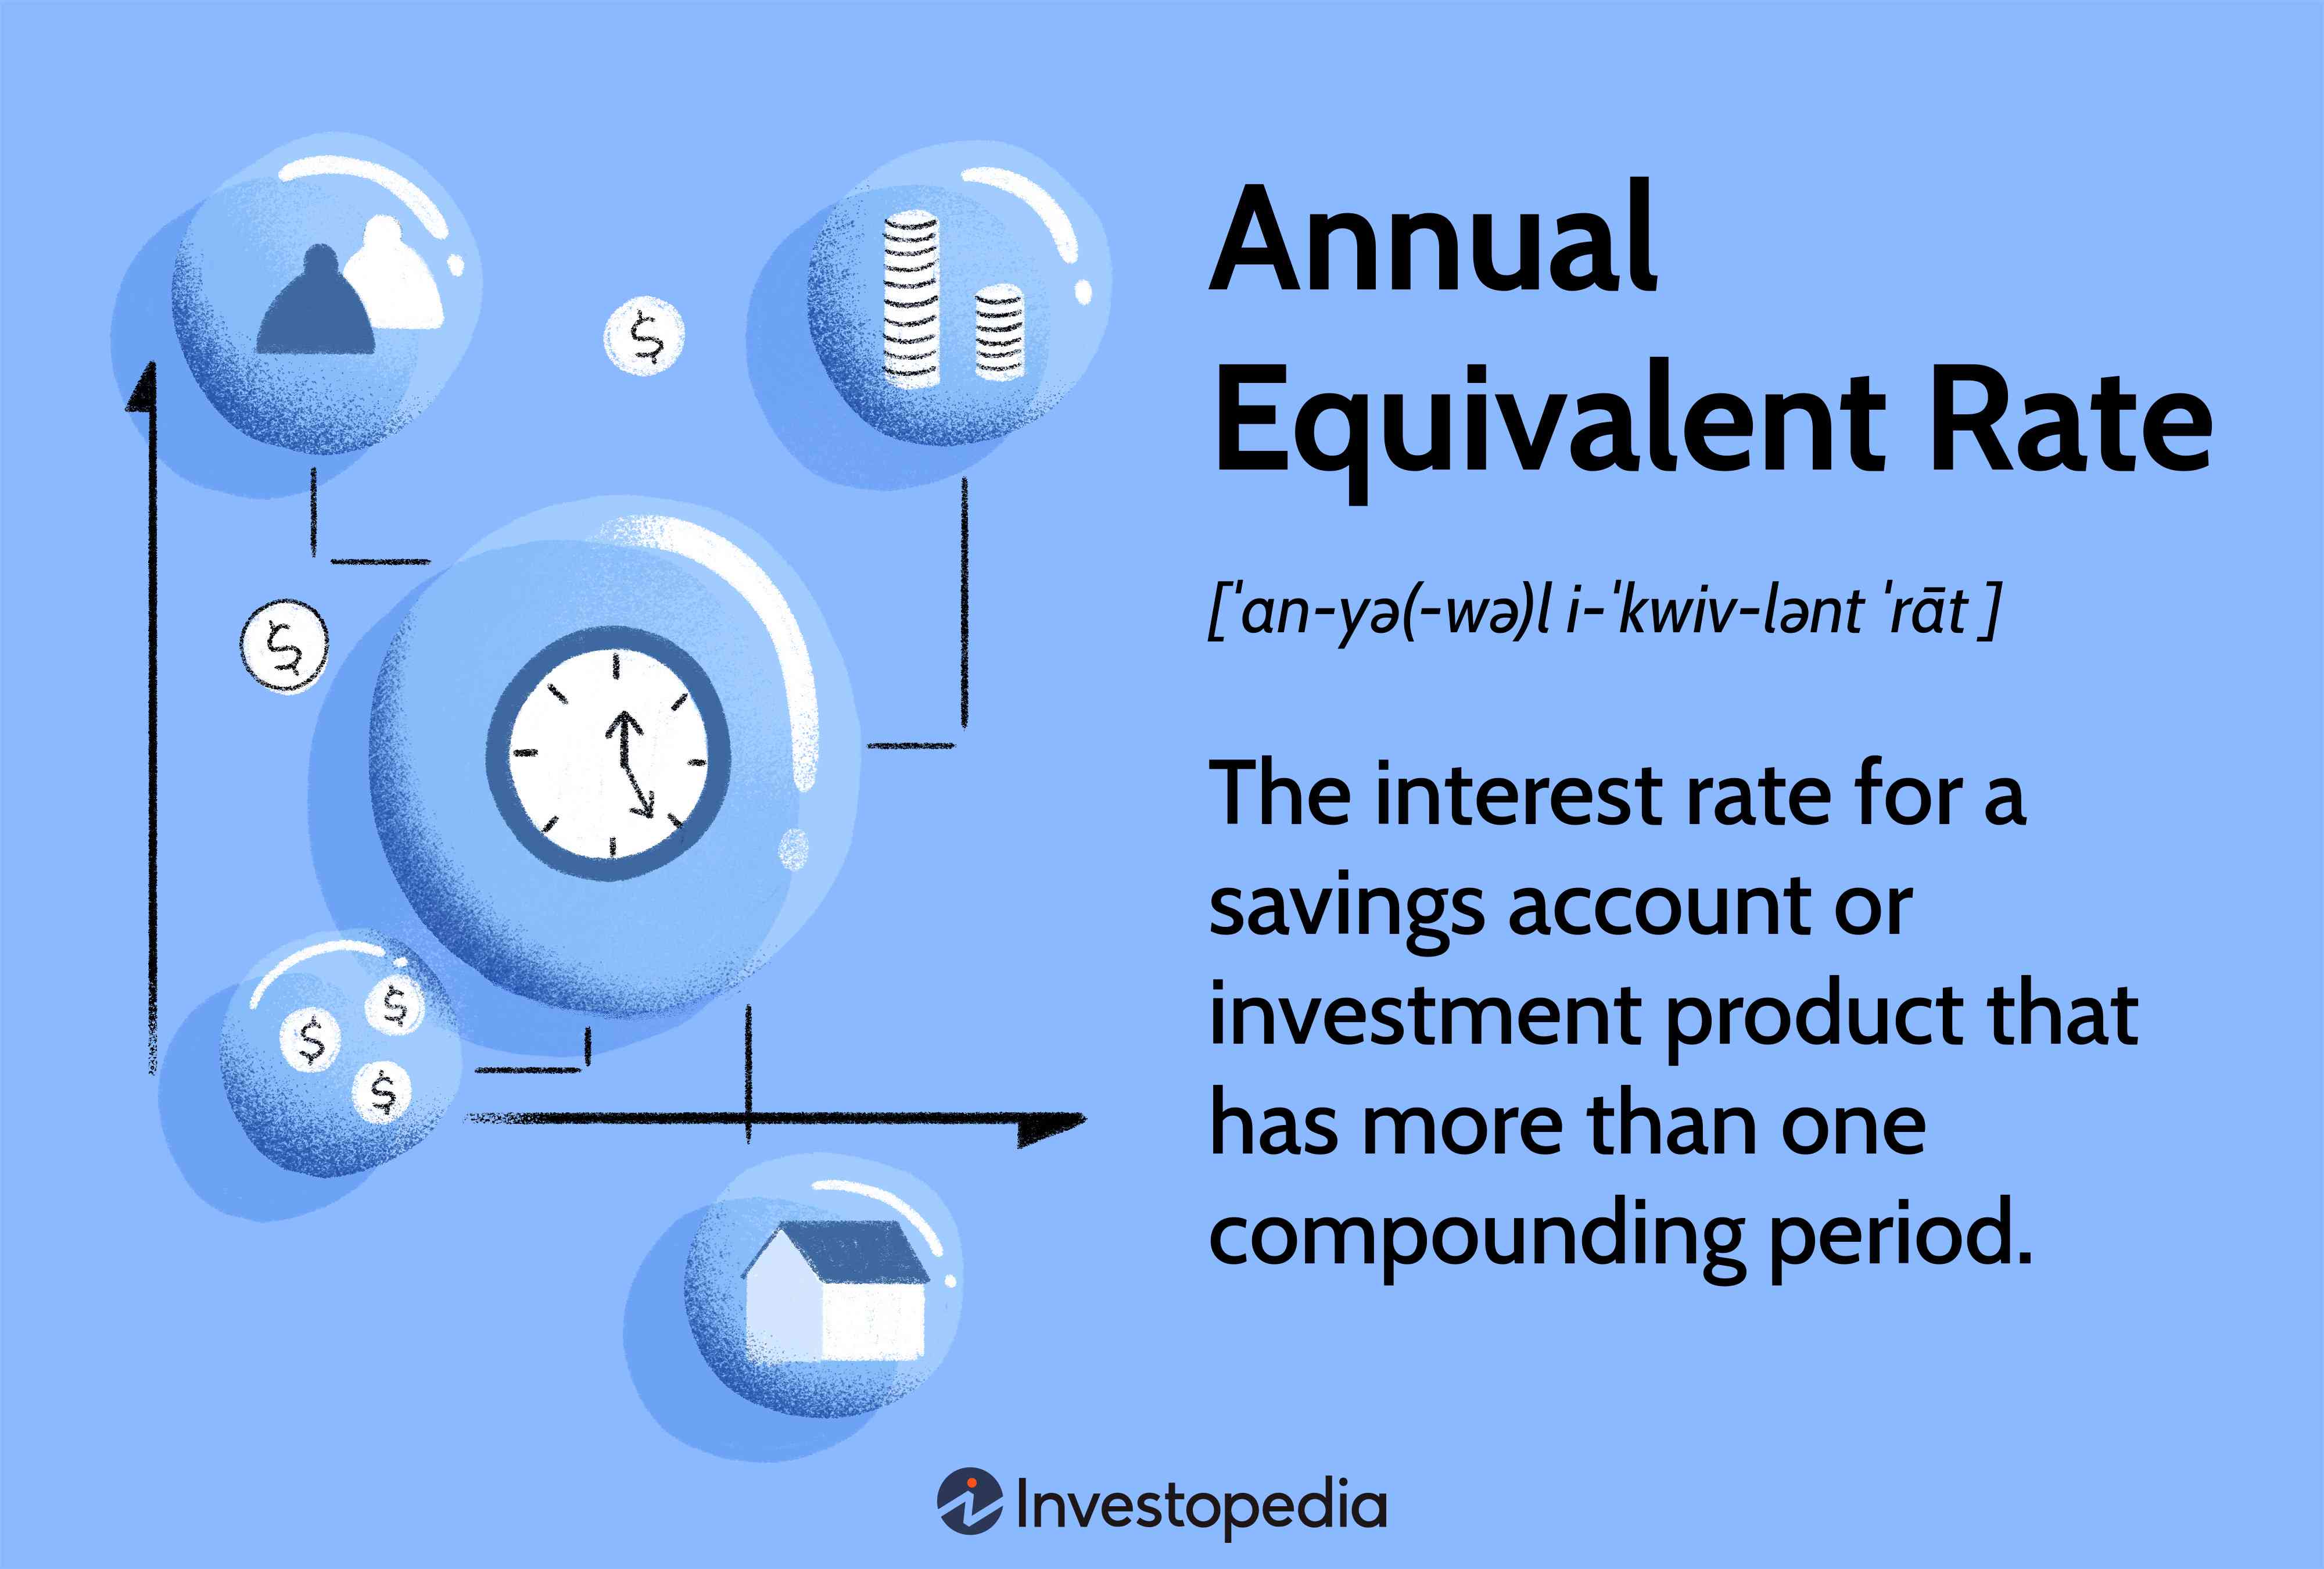 Annual Equivalent Rate: The interest rate for a savings account or investment product that has more than one compounding period.